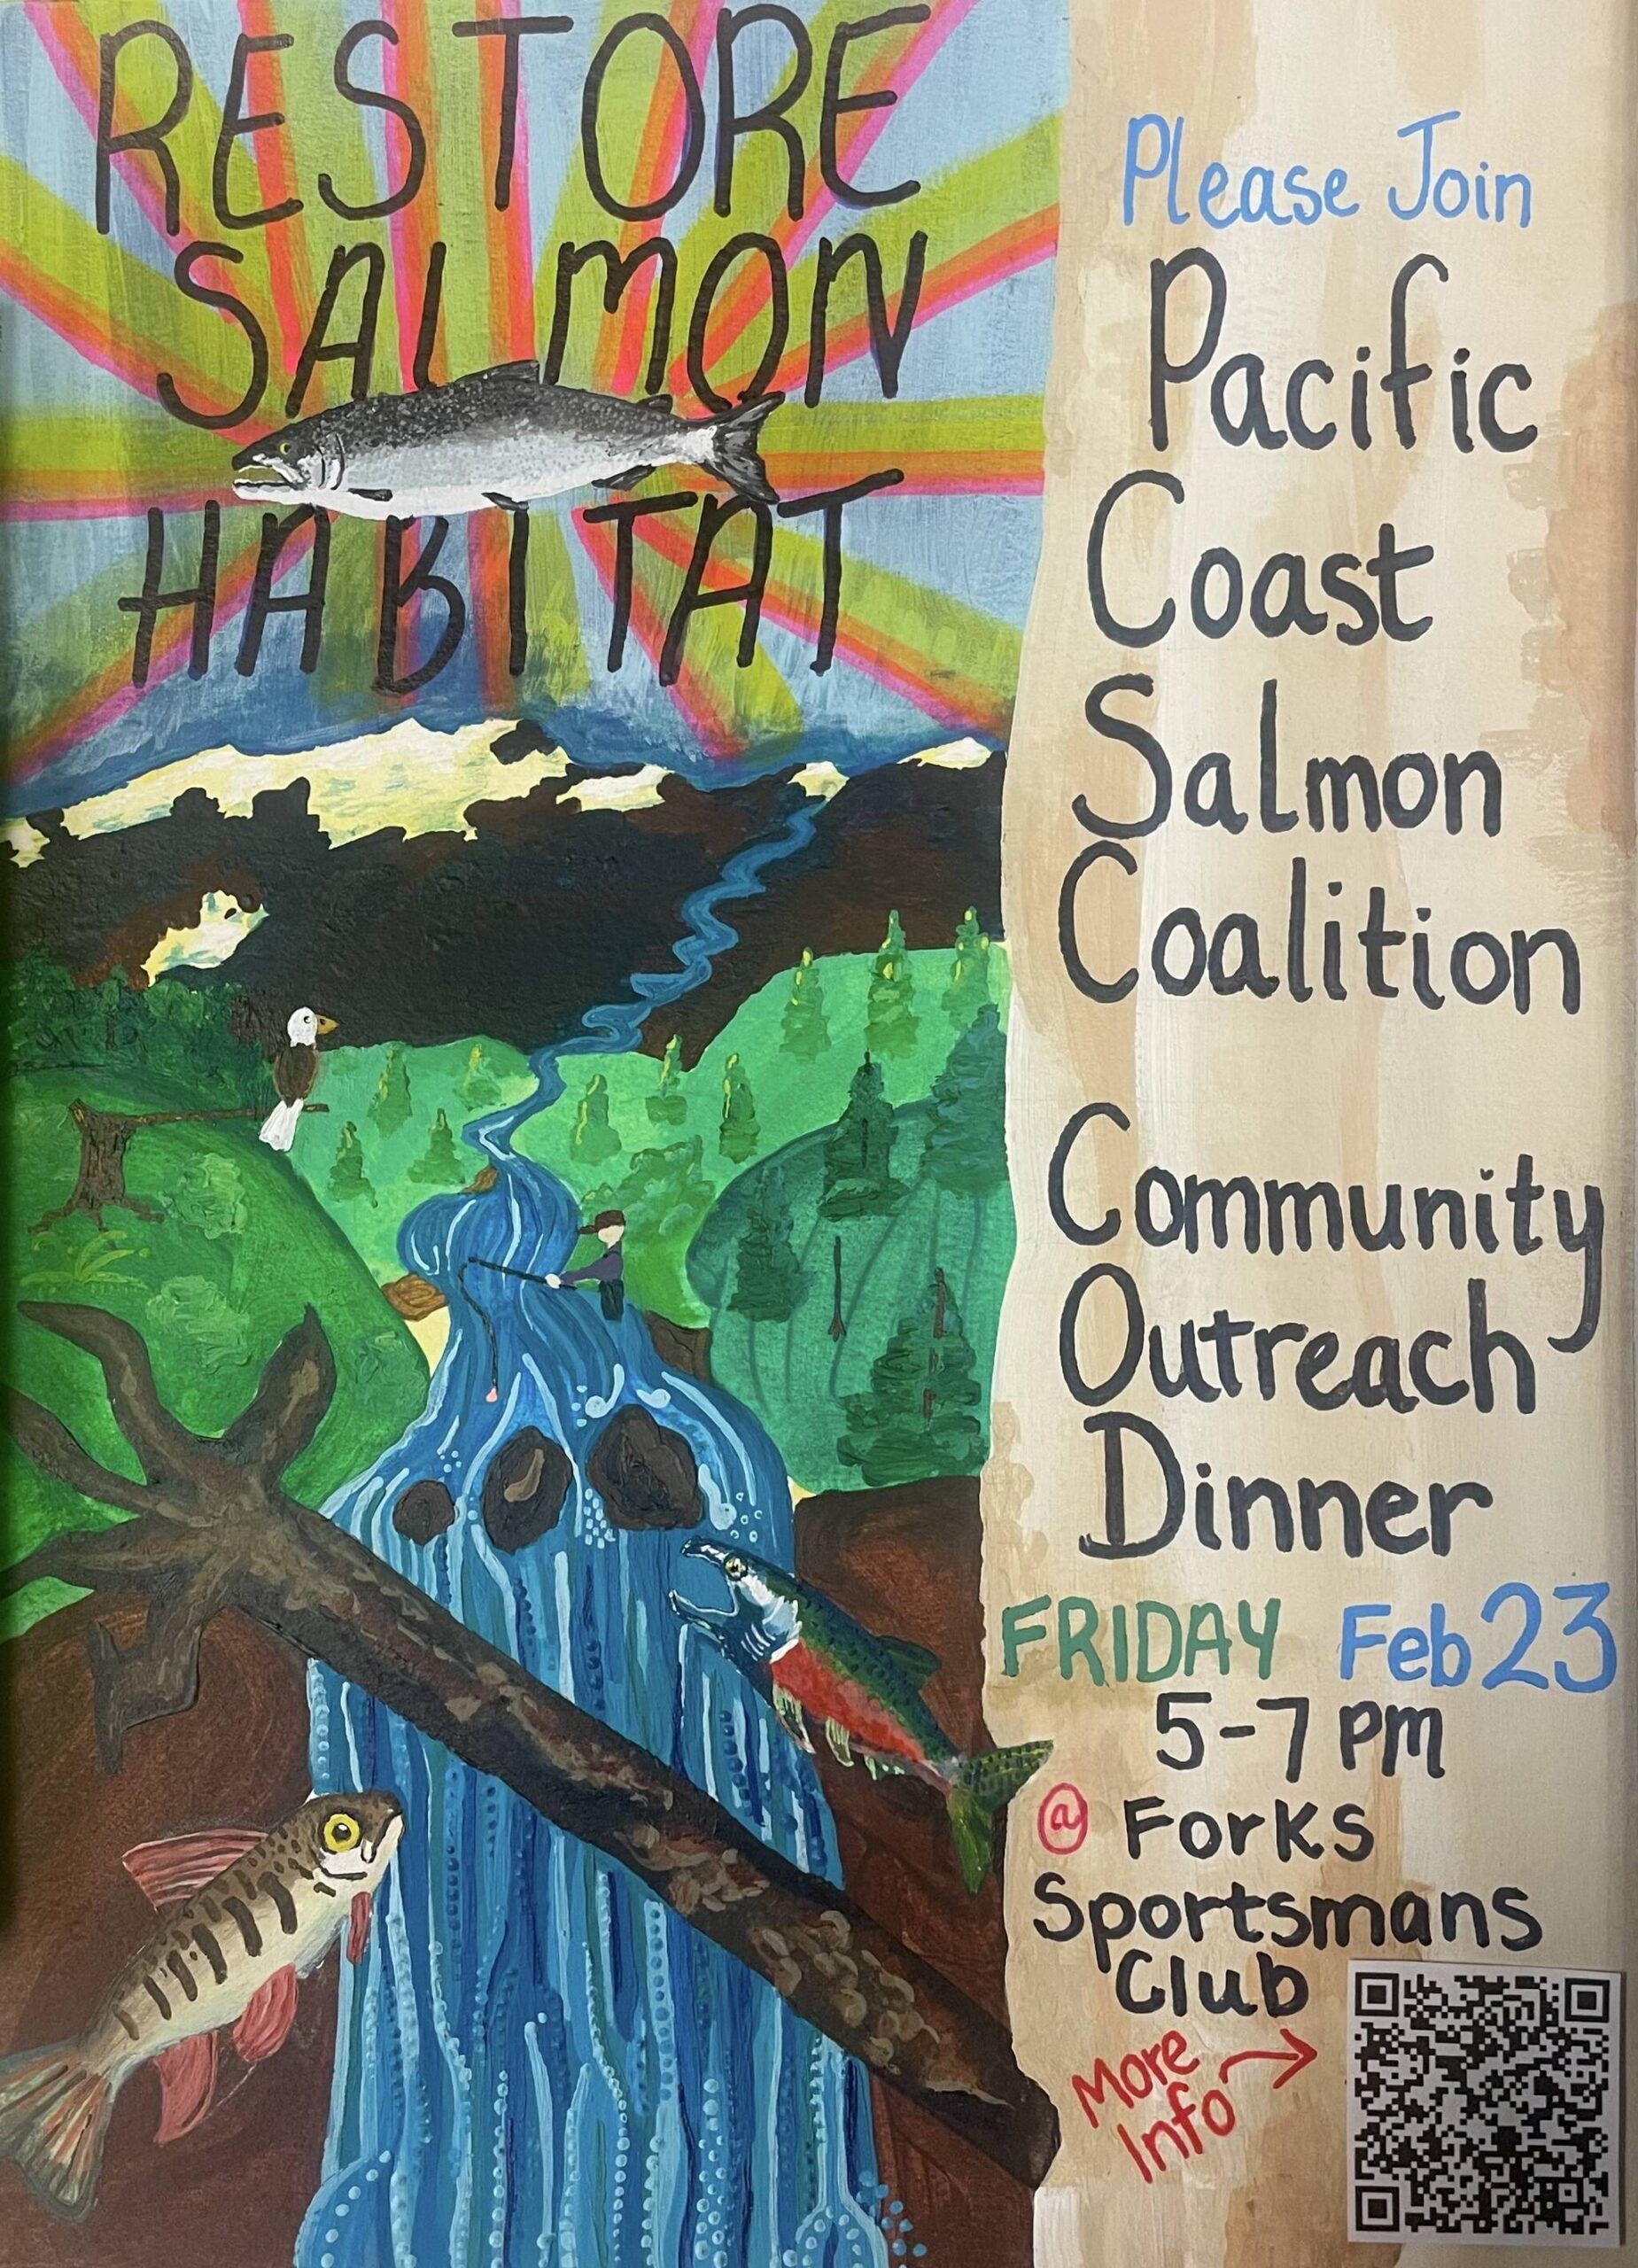 The Pacific Coast Salmon Colation (PCSC) will hold a Community Outreach Dinner and Meeting on Friday, Feb. 23 from 5 - 7 p.m. at the West End Sportsmans Club. In addition to the meal, there will be presentations by local entities as well as an update on future plans. PCSC is a grassroots, nonprofit volunteer-based organization whose mission is to be actively involved in local volunteer-based habitat restoration to achieve a healthy salmon resource within our region.